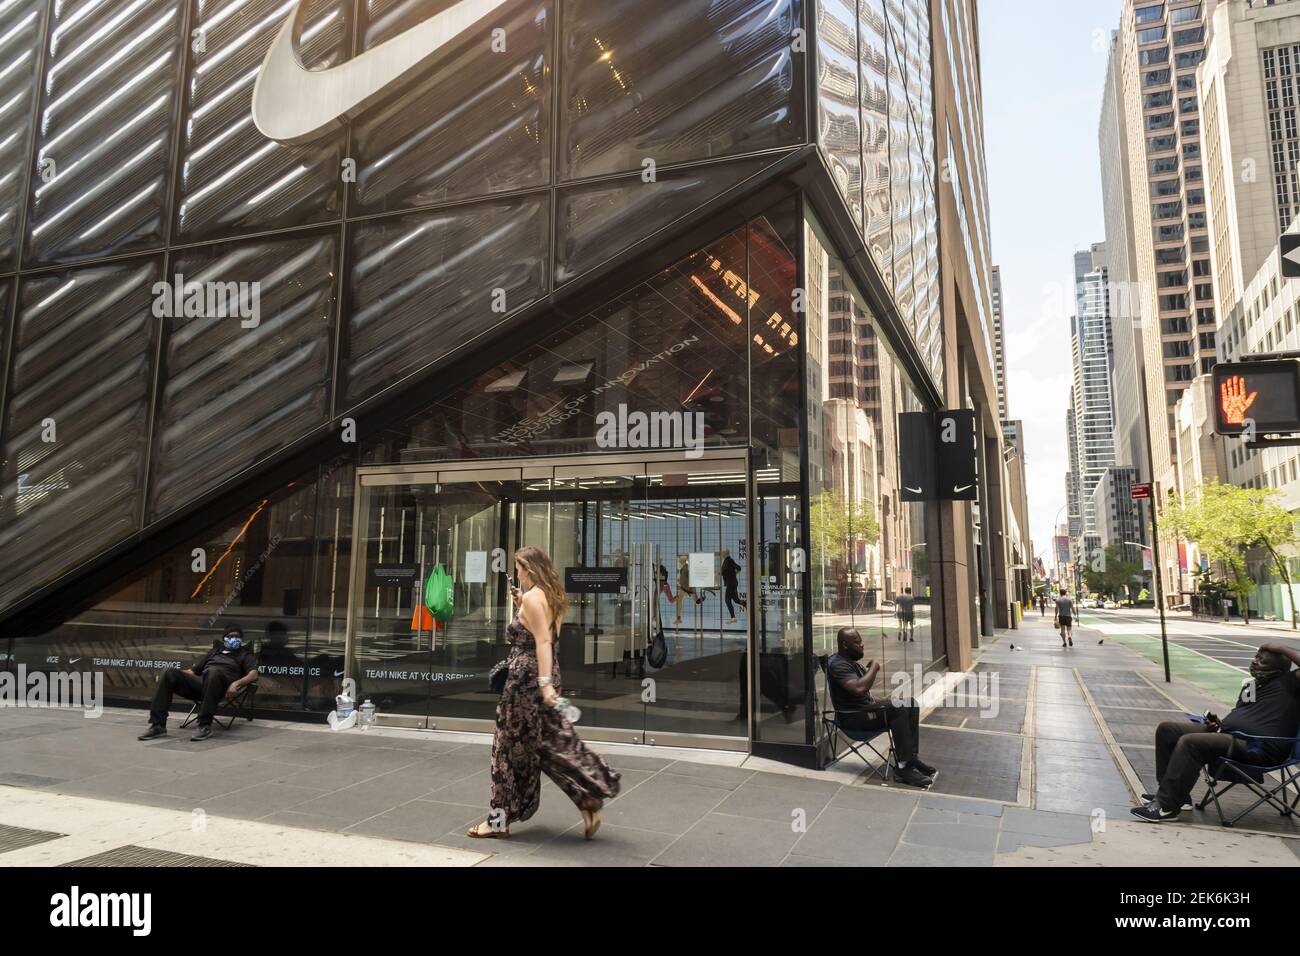 The Nike store on Fifth Avenue in New York remains closed as on Sunday,  June 21, 2020. As of June 22 the city enters Phase 2 of its reopening plan  allowing personal